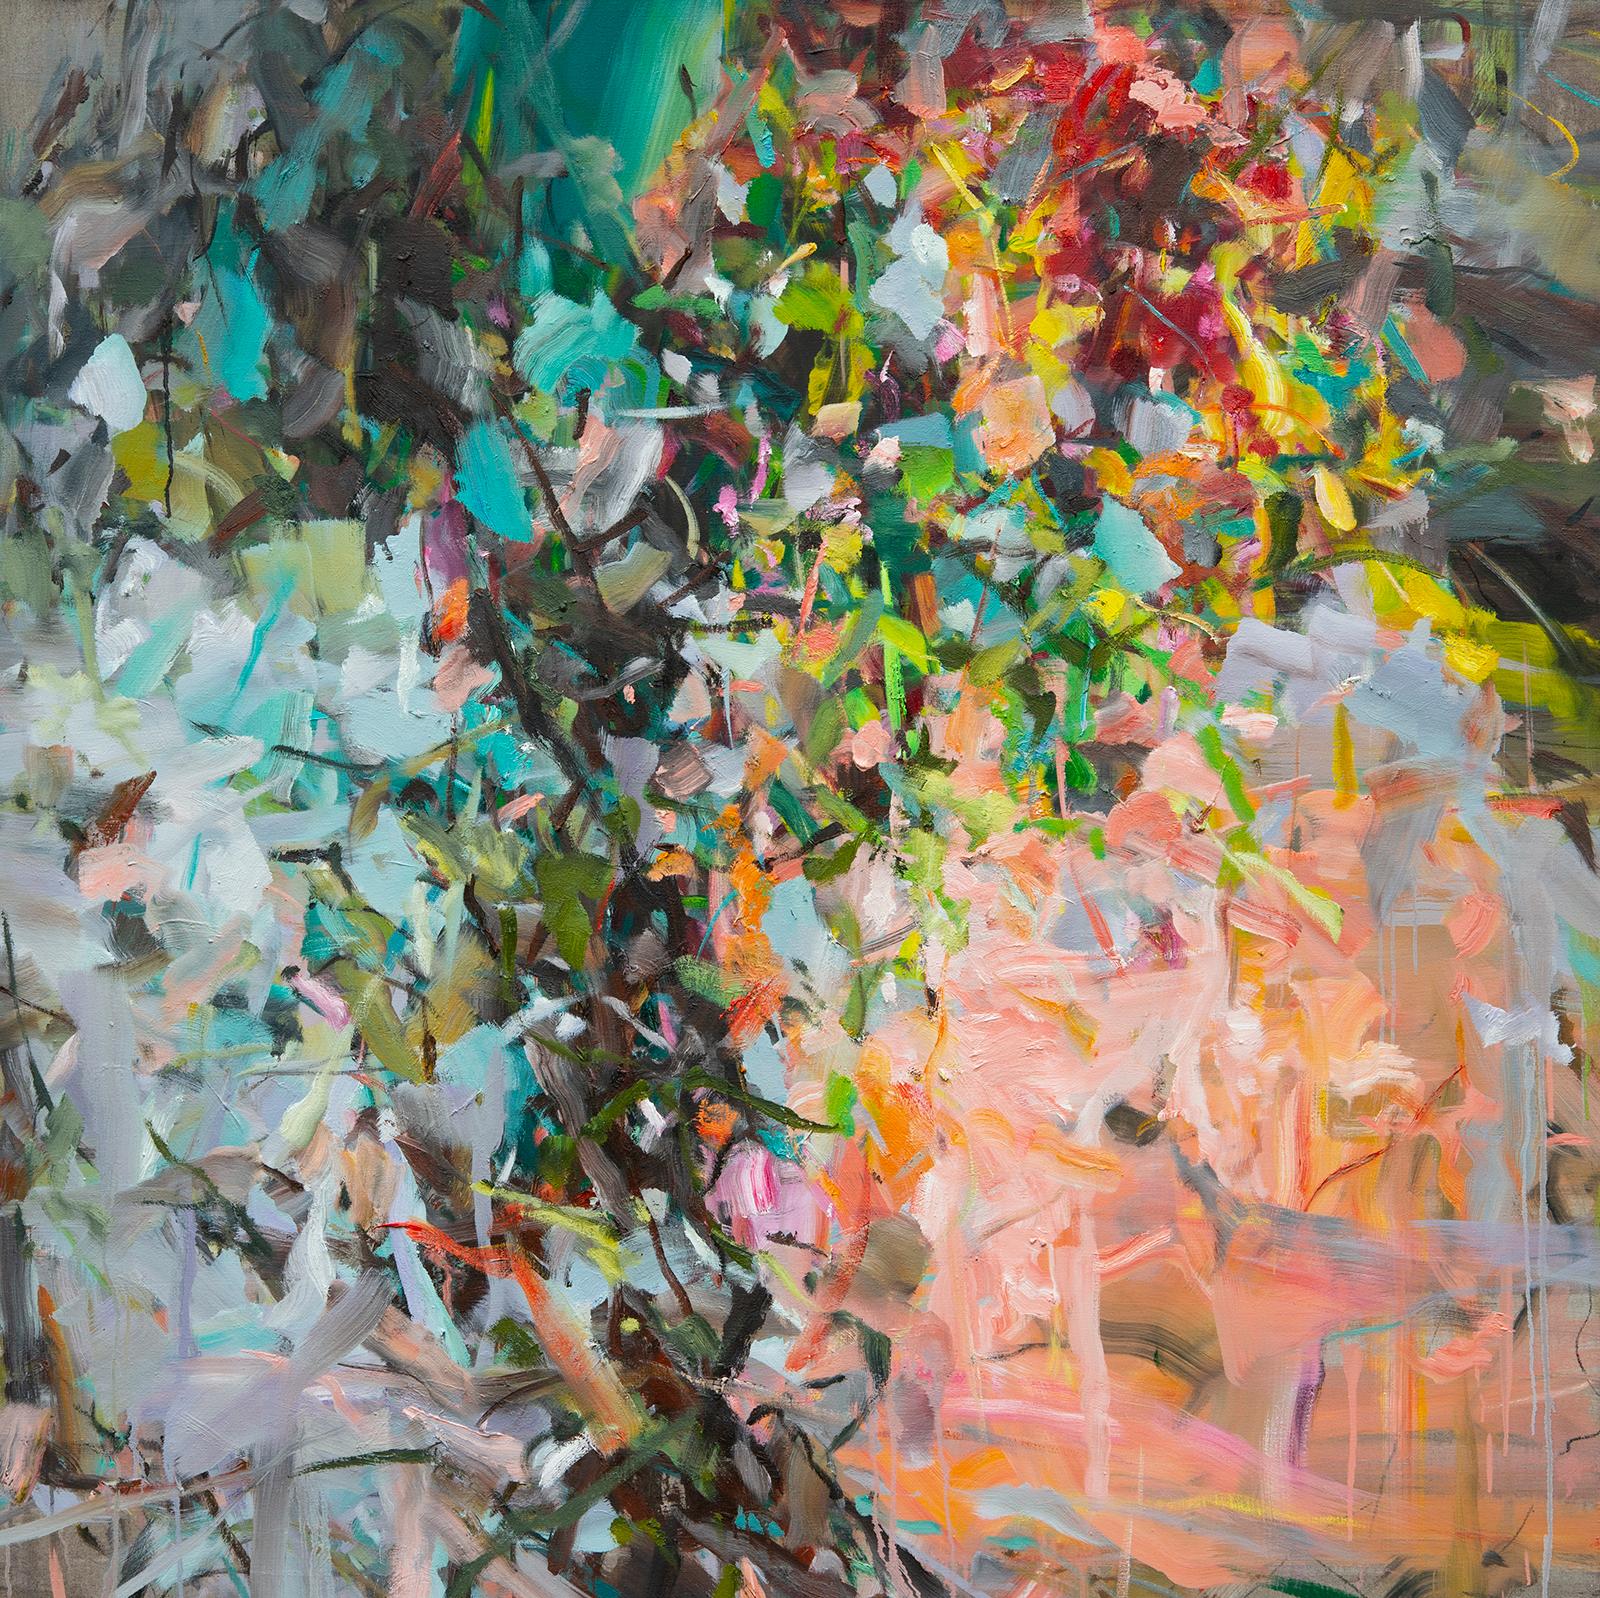 'A Tree' 2020 by Chinese/Canadian artist Yangyang Pan. Oil on linen, 60 x 60 in. This beautiful abstract-impressionistic garden landscape painting incorporates large gestural brush strokes in rich colors of white, green, pink, green, yellow, blue,